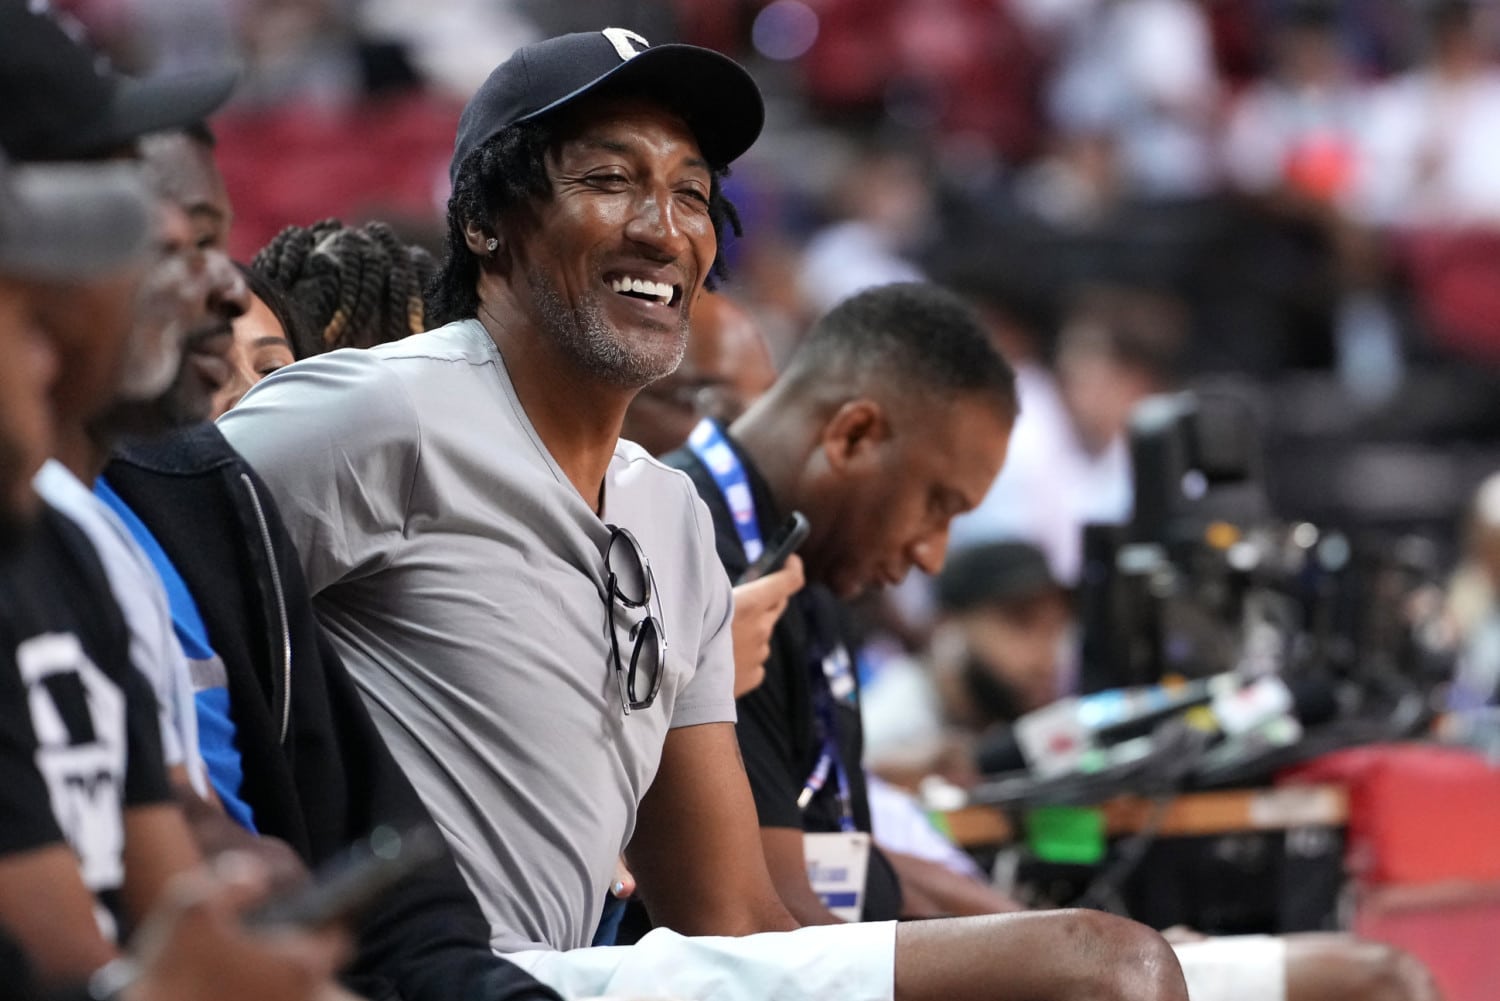 Here's which celebrities were at NBA Finals Game 3 in Boston